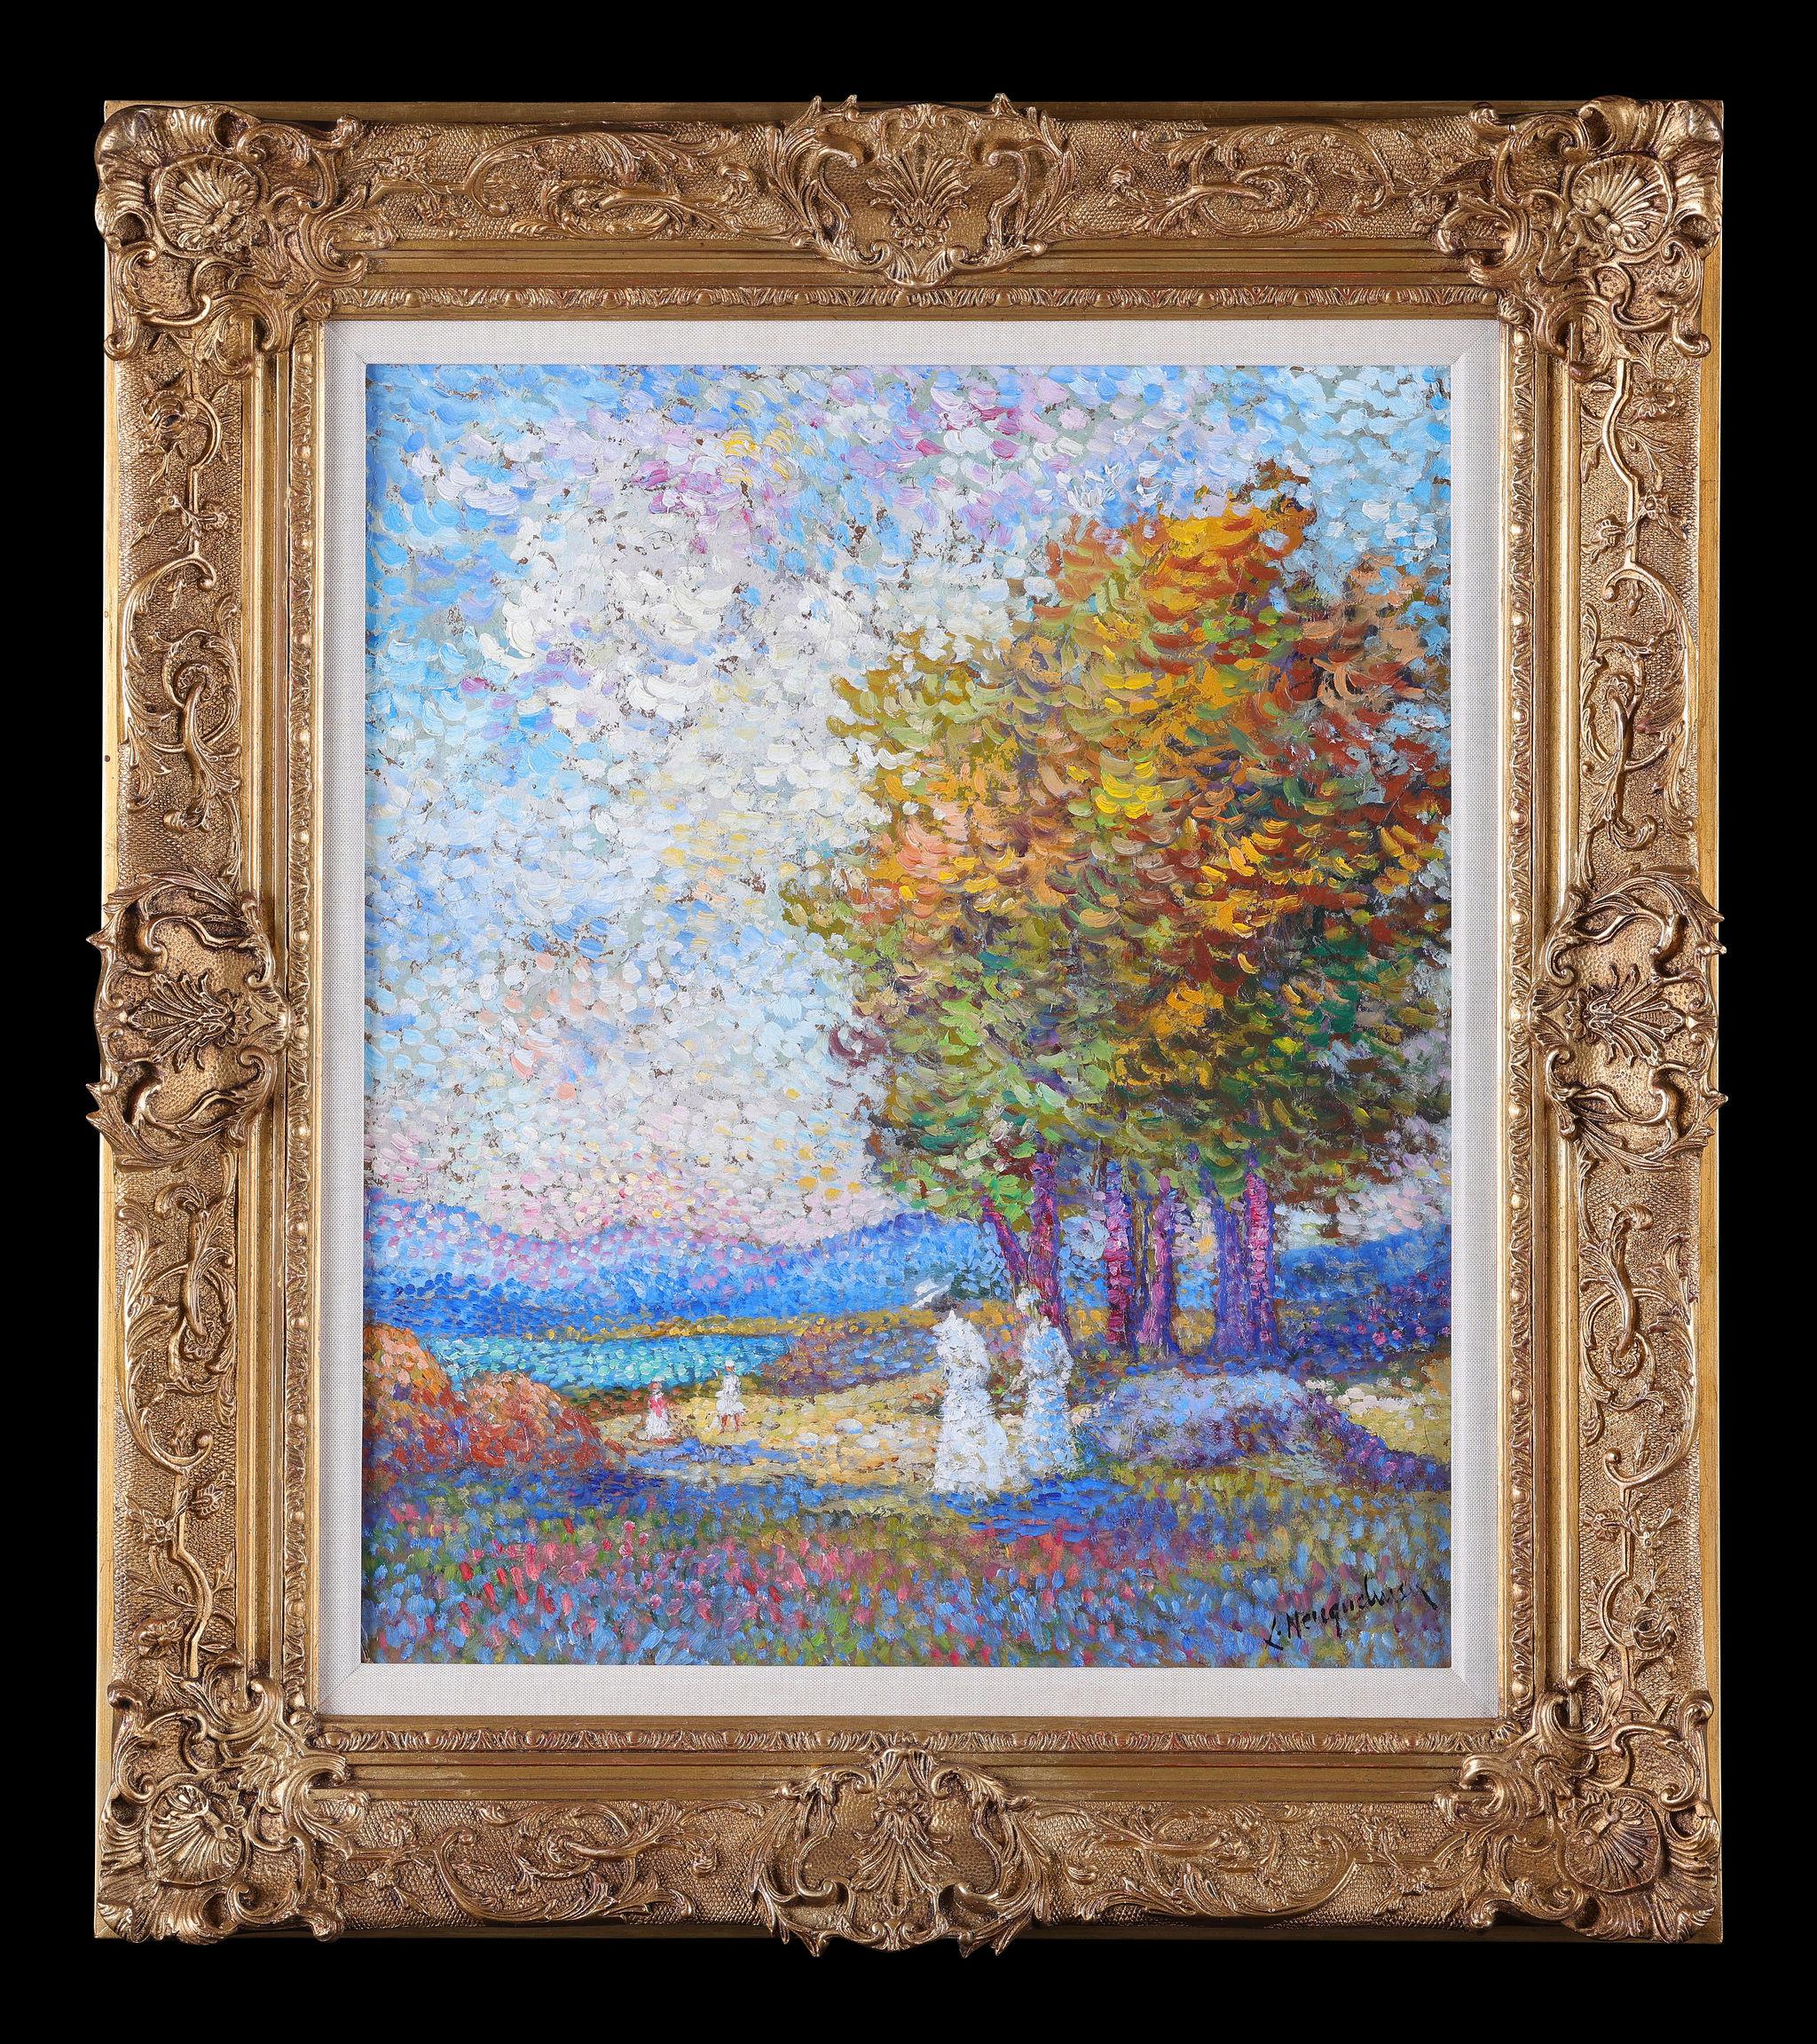 LUCIEN NEUQUELMAN

An exquisite pointillist oil painting. Signed and titled on the reverse.
The frame has the gallery exhibition label on it.

Painting Size: 22 x 18